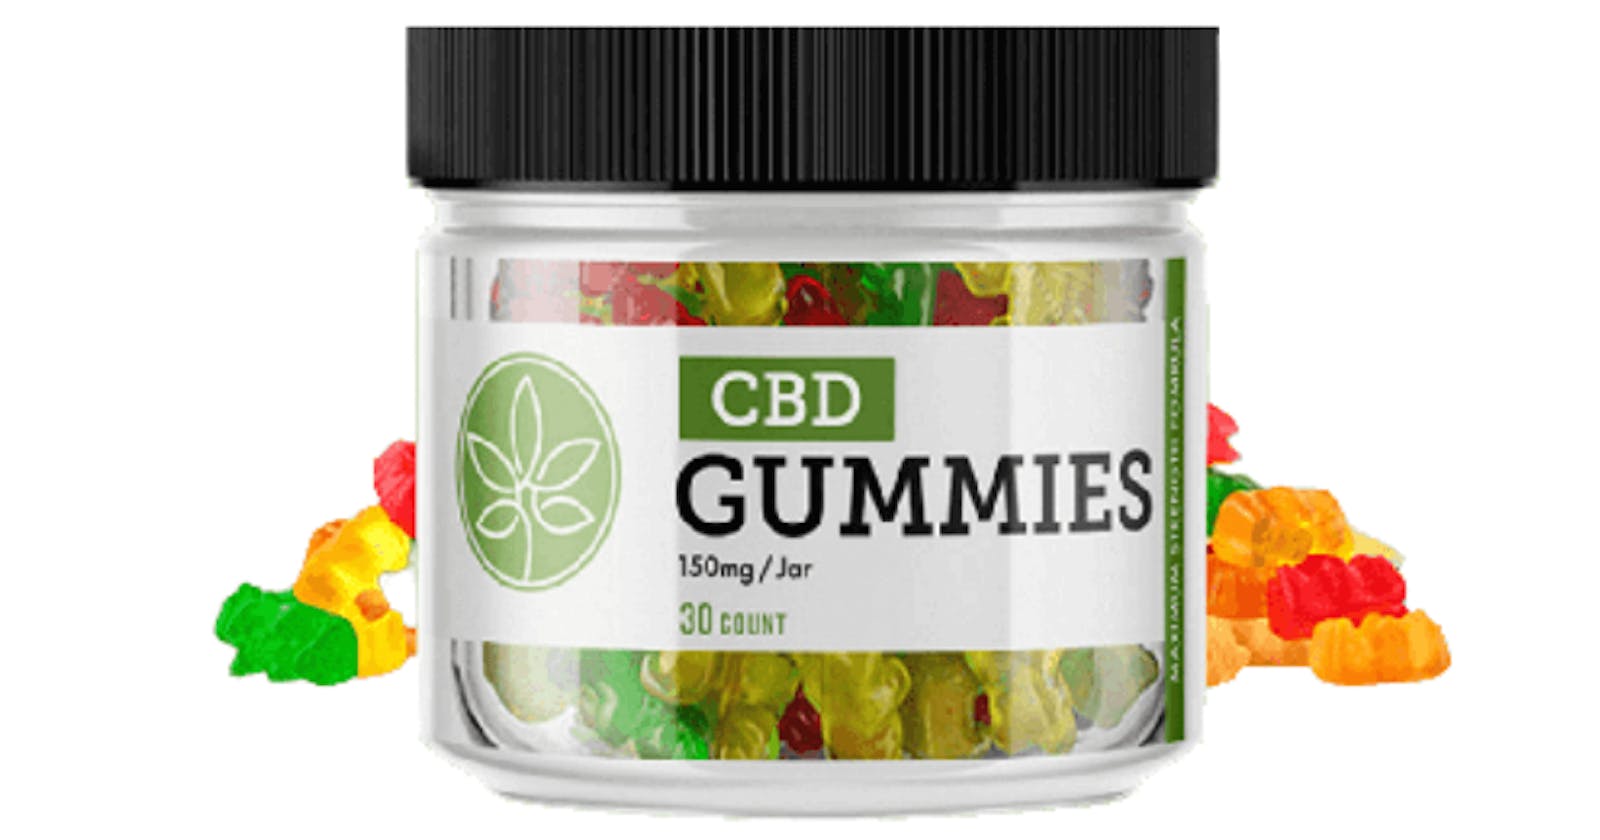 Royal CBD Gummies - Weight loss, Ingredients & Where to Order?